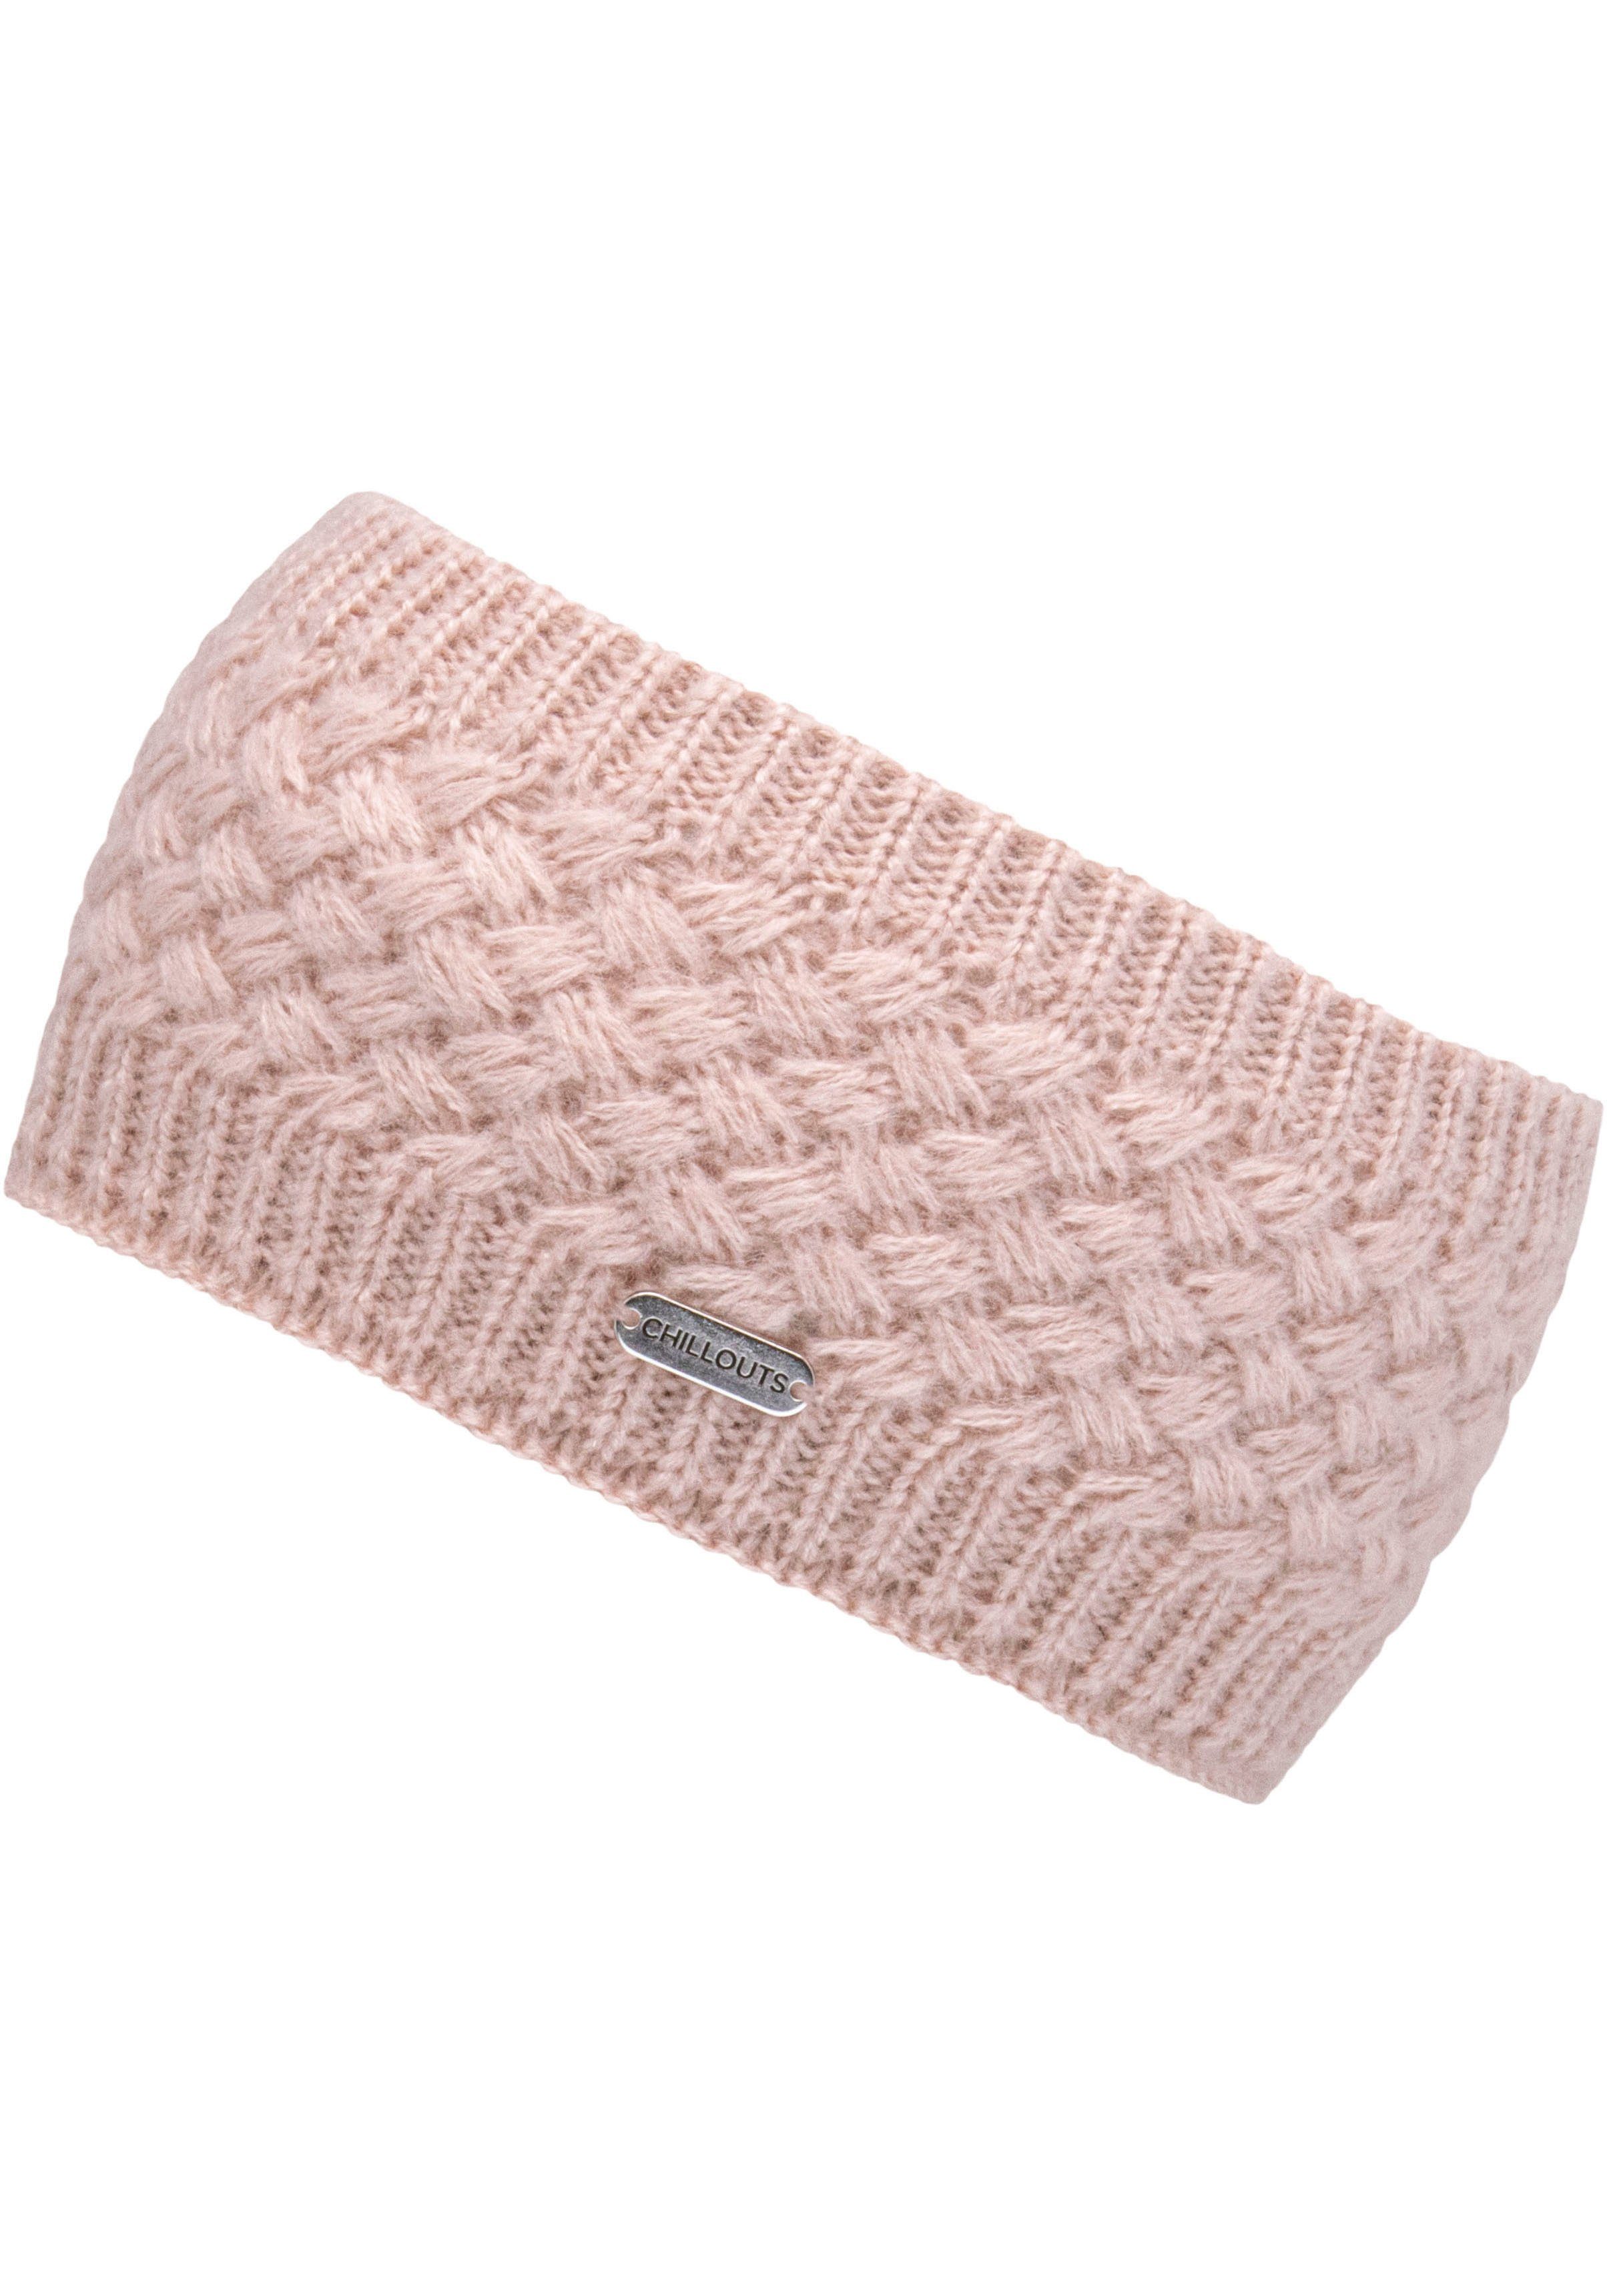 Metall-Label Stirnband Headband chillouts Felicitas rose